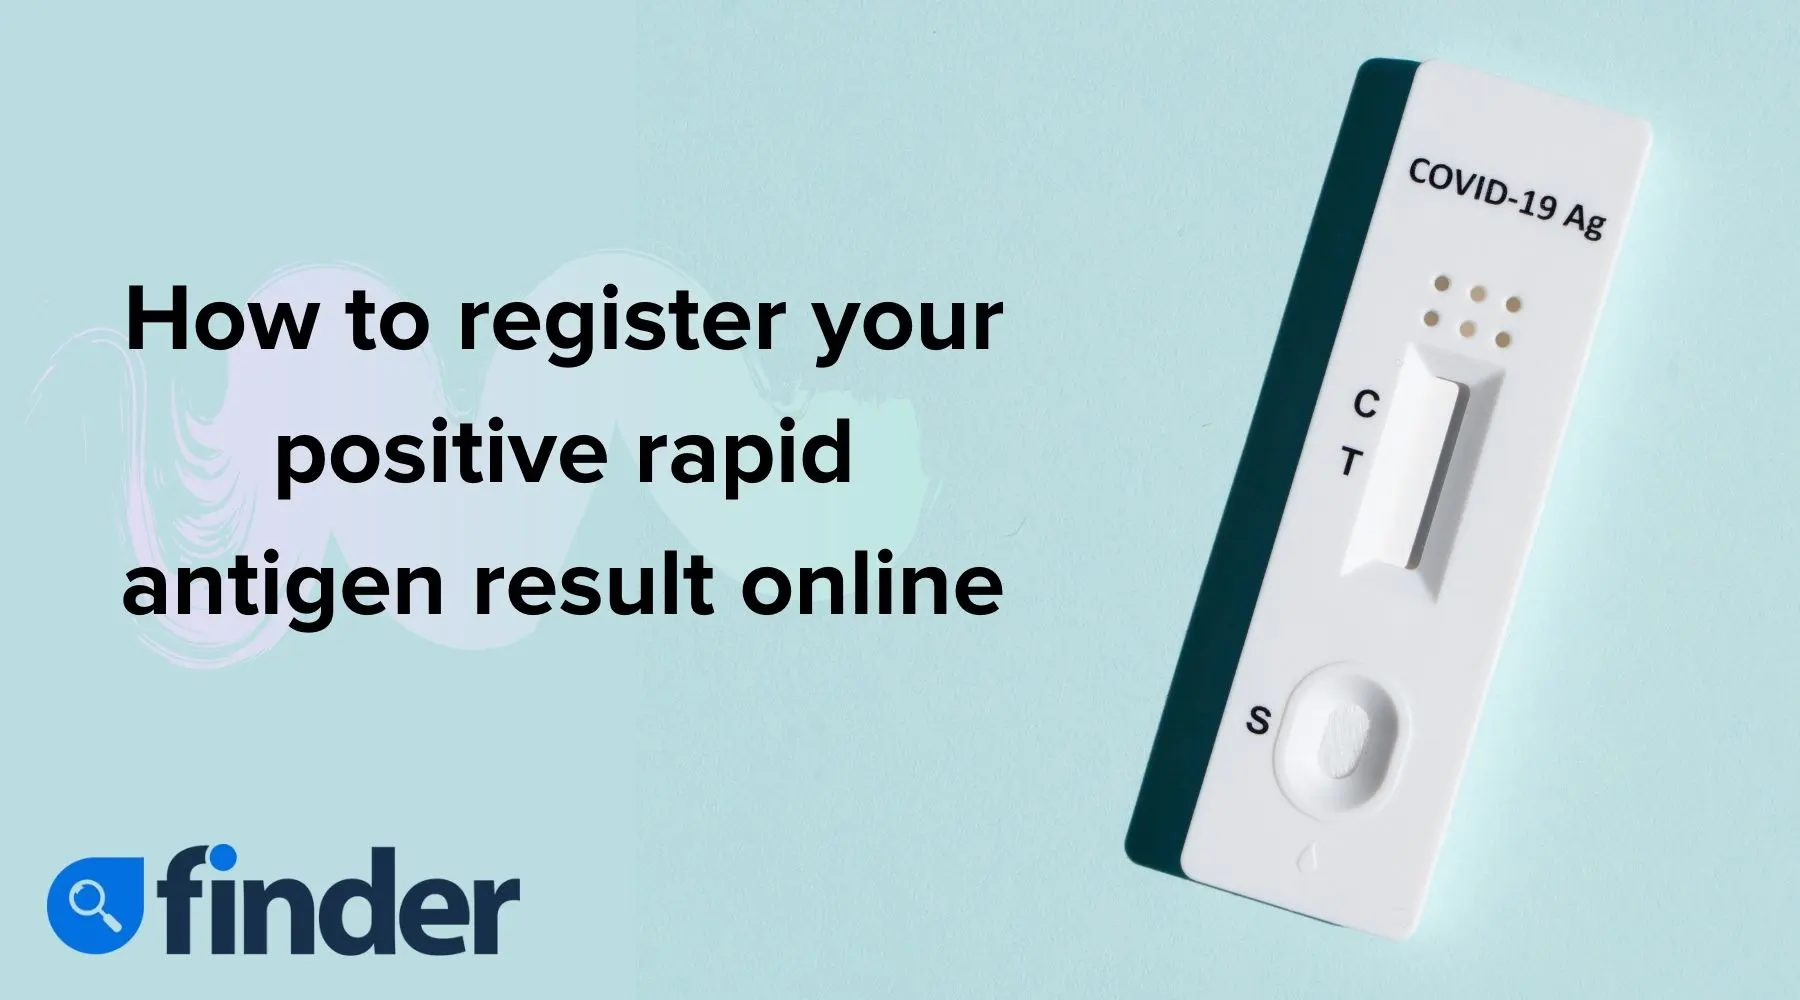 Here’s how to register your rapid antigen test result in NSW